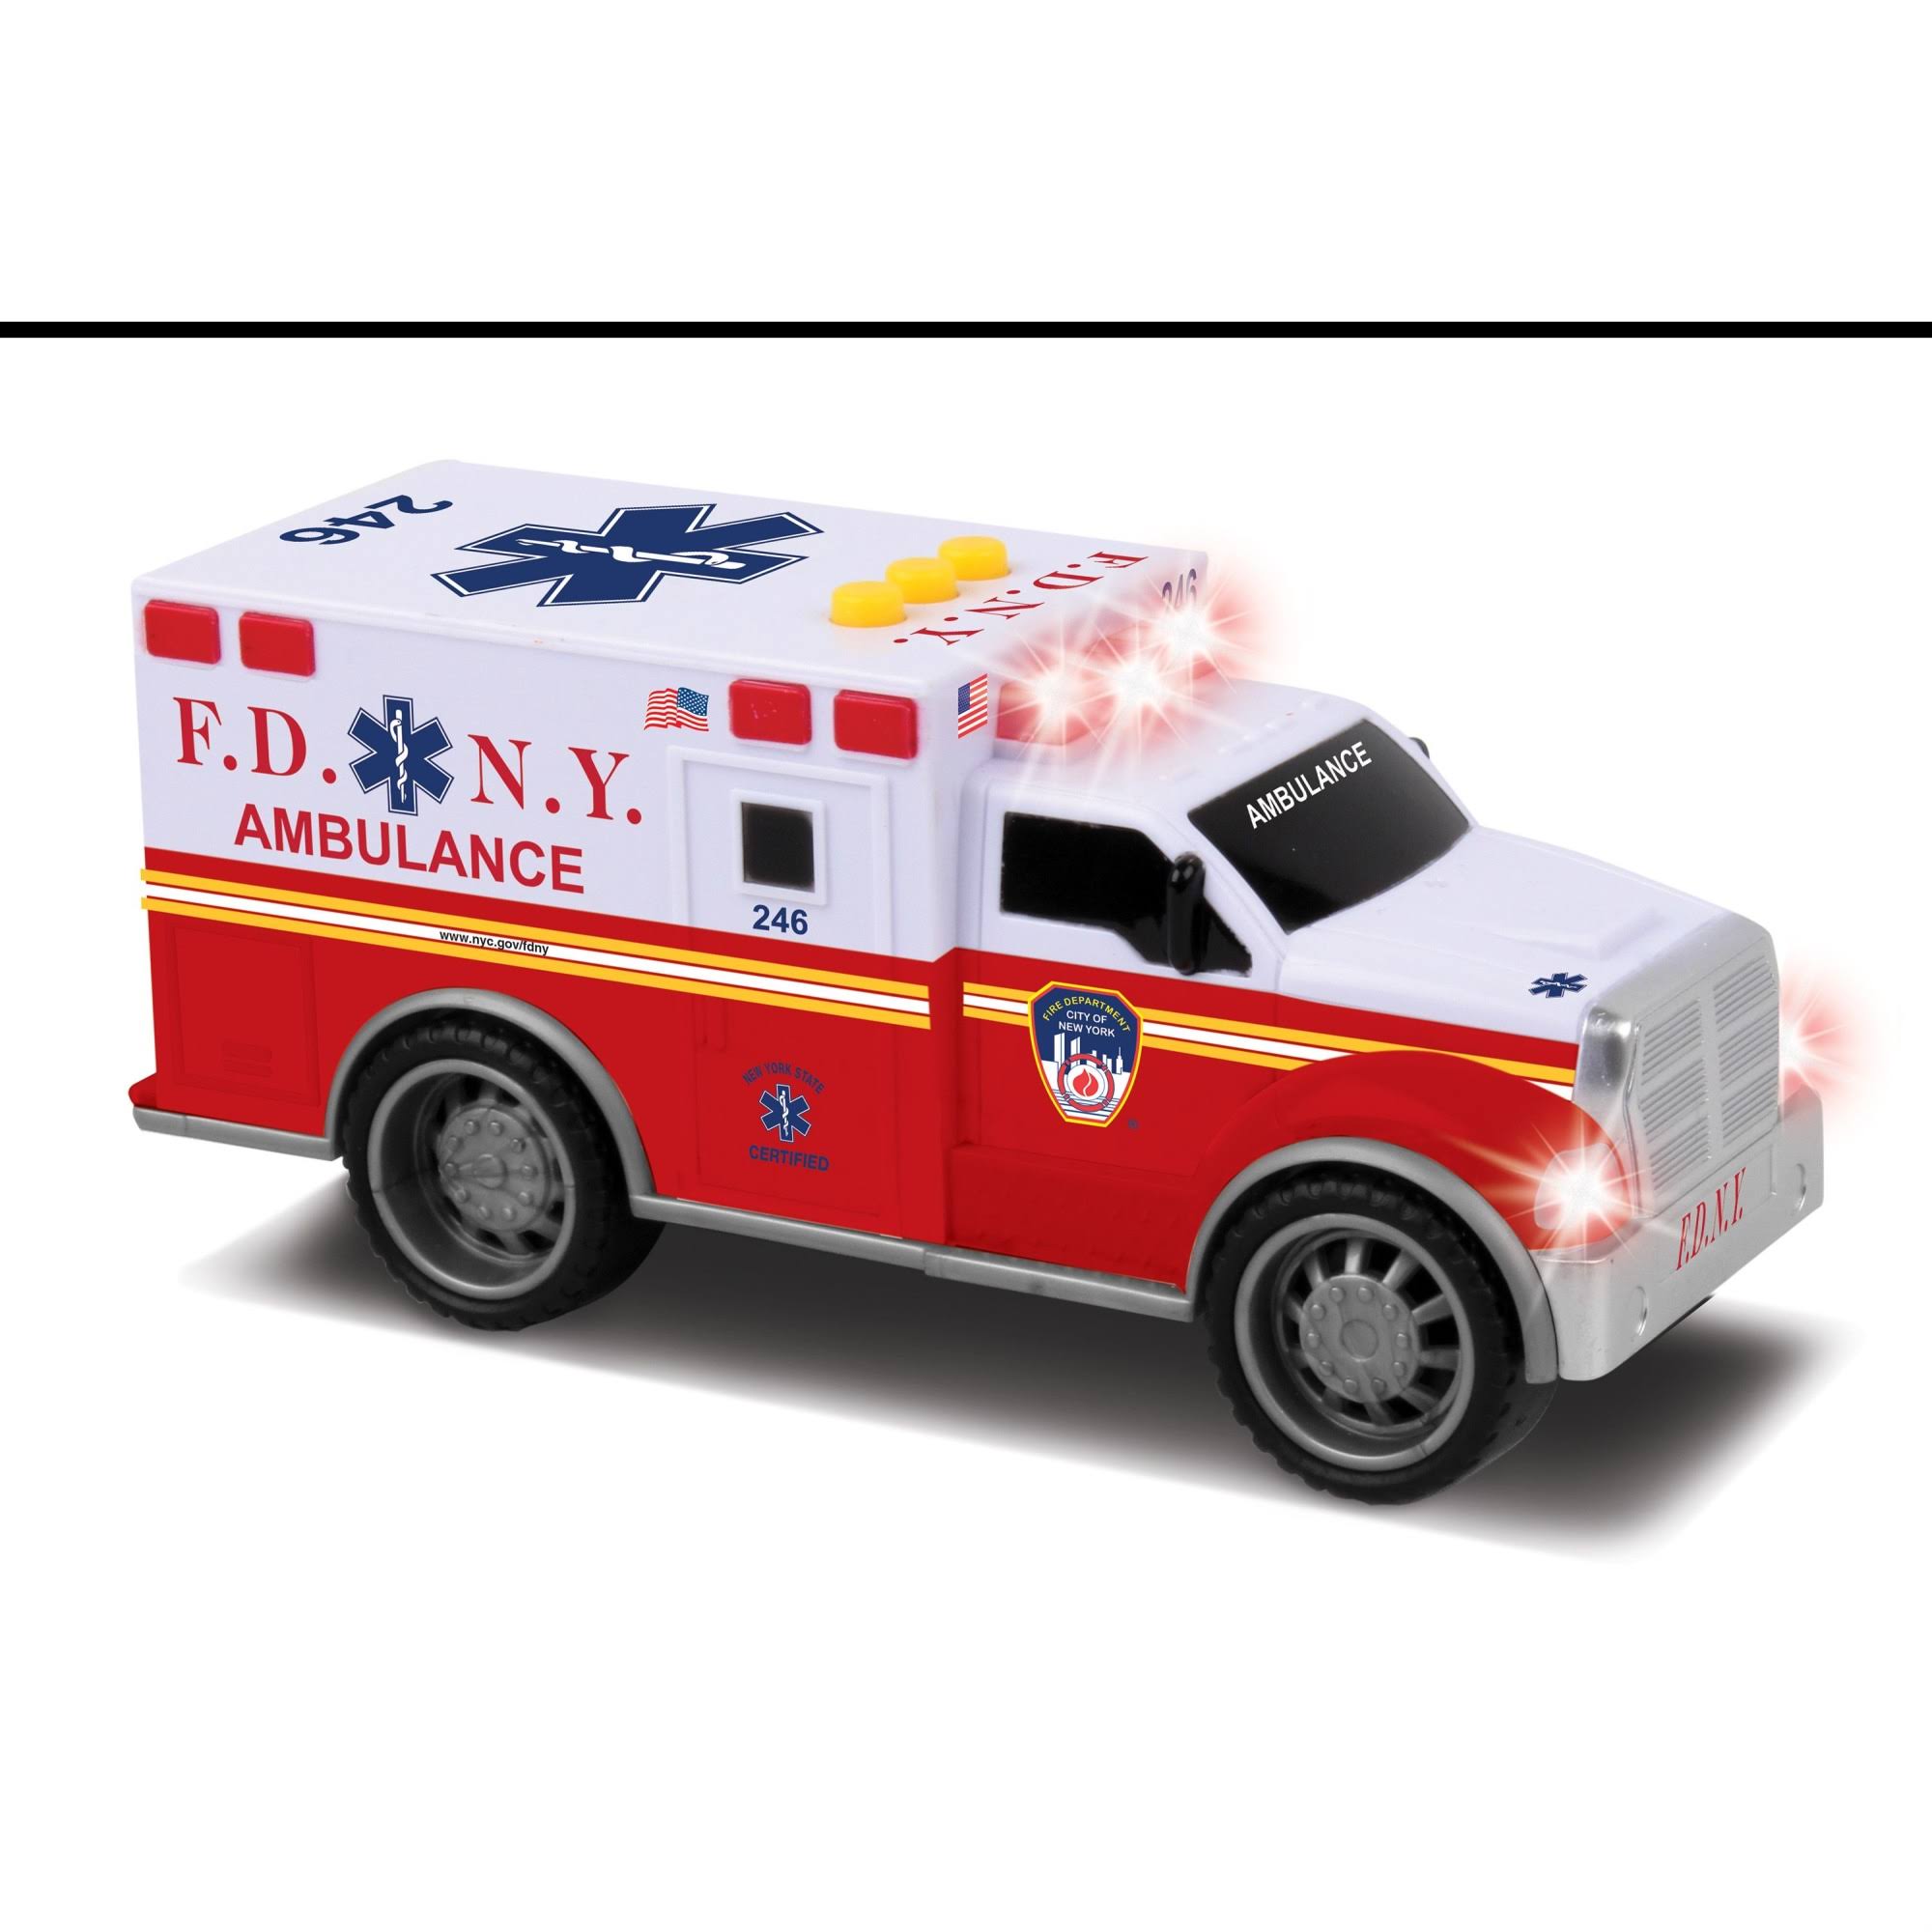 Daron Worldwide Trading NY554772 2.5 x 7 in. FDNY Ambulance with Lights & Sound